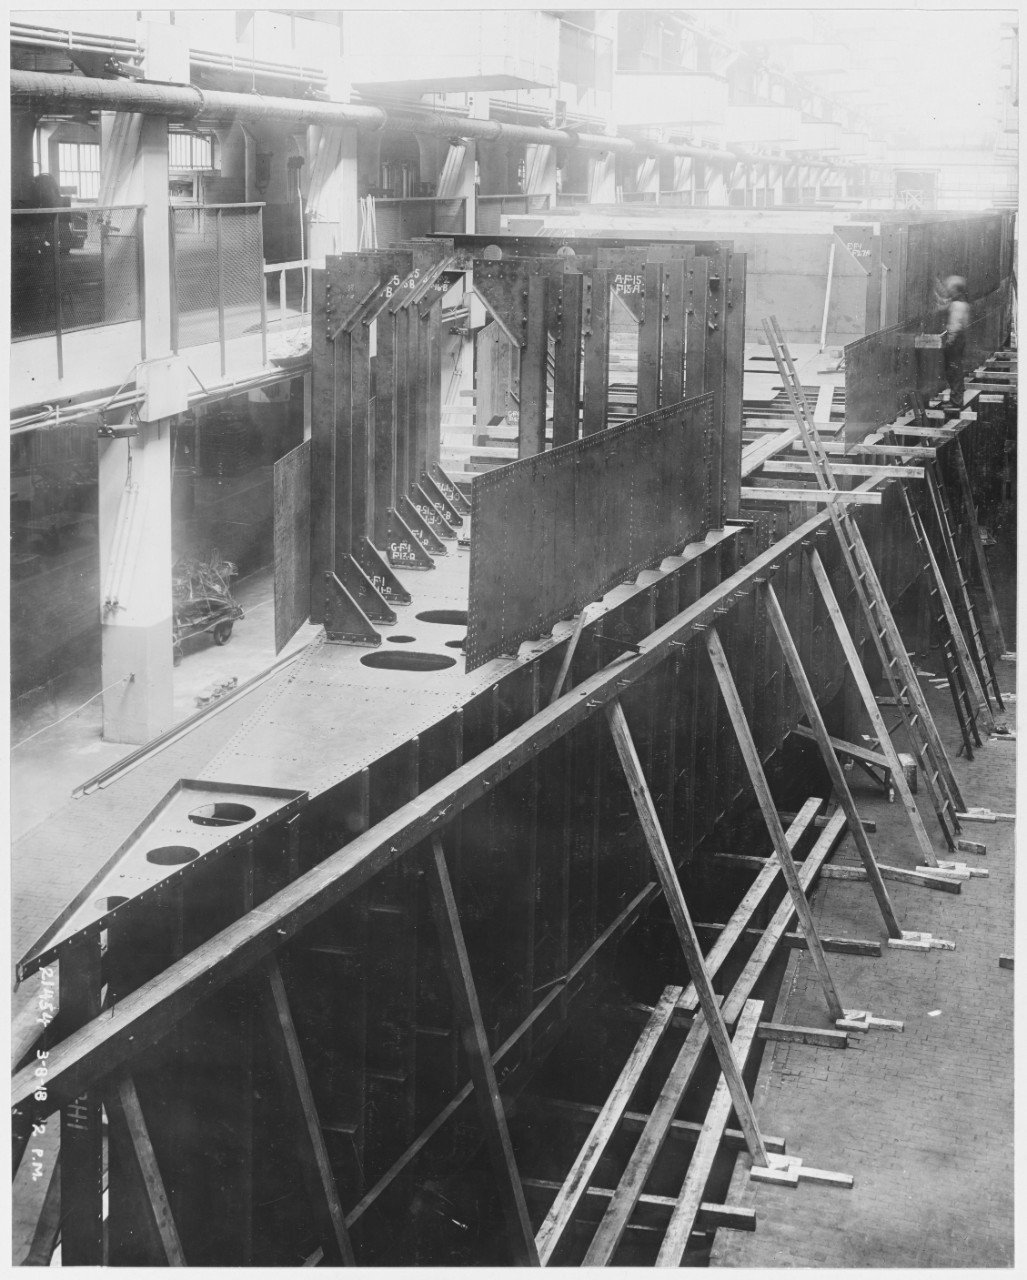 Construction of Ford Eagle Boats, Ford Motor Company, March 8, 1918